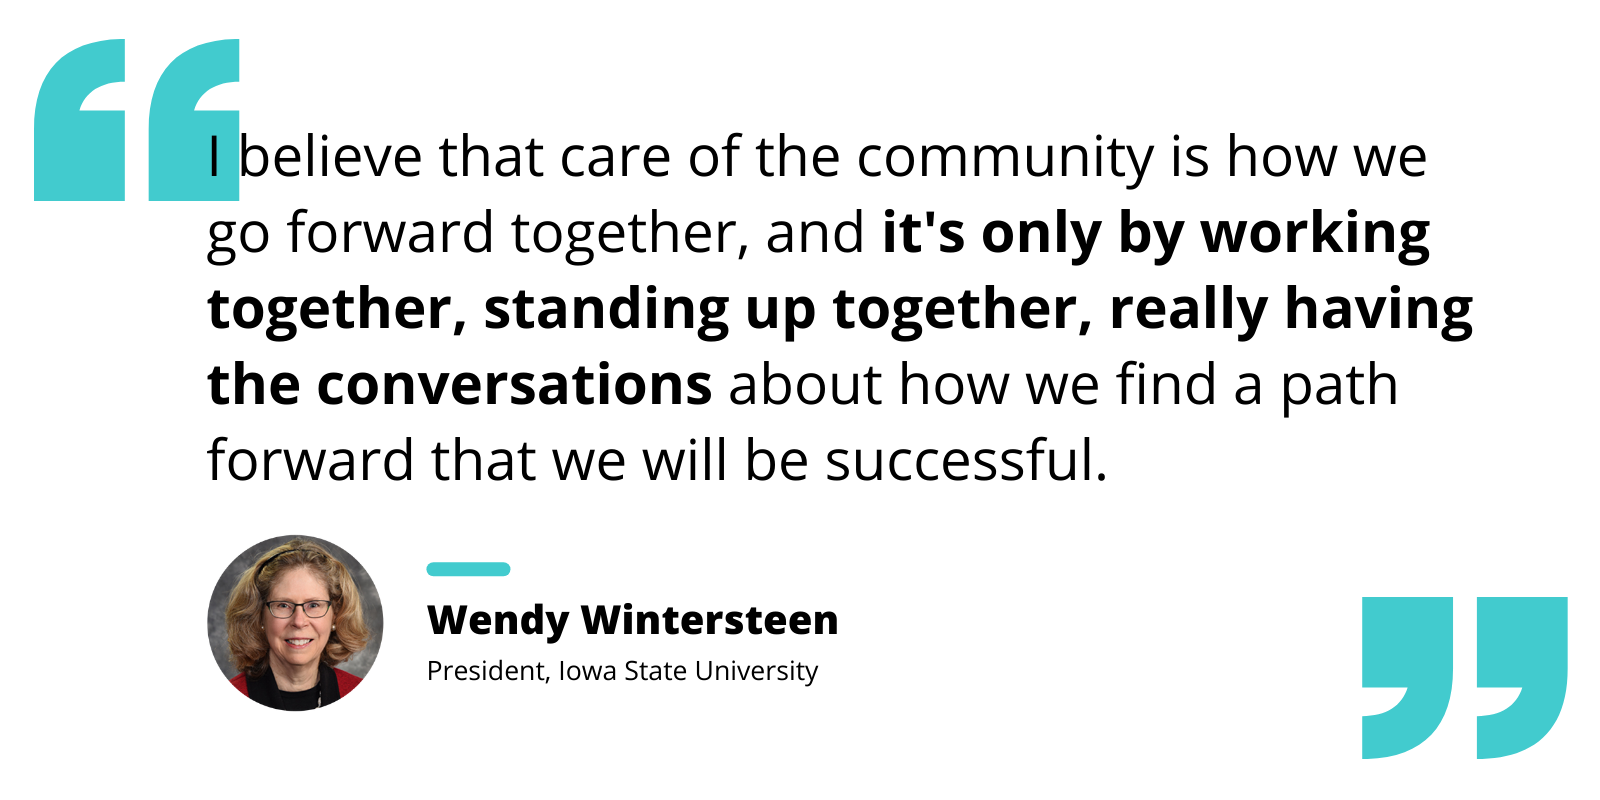 Quote by Wendy Wintersteen re: moving forward as a community by working together, standing together, and conversation.